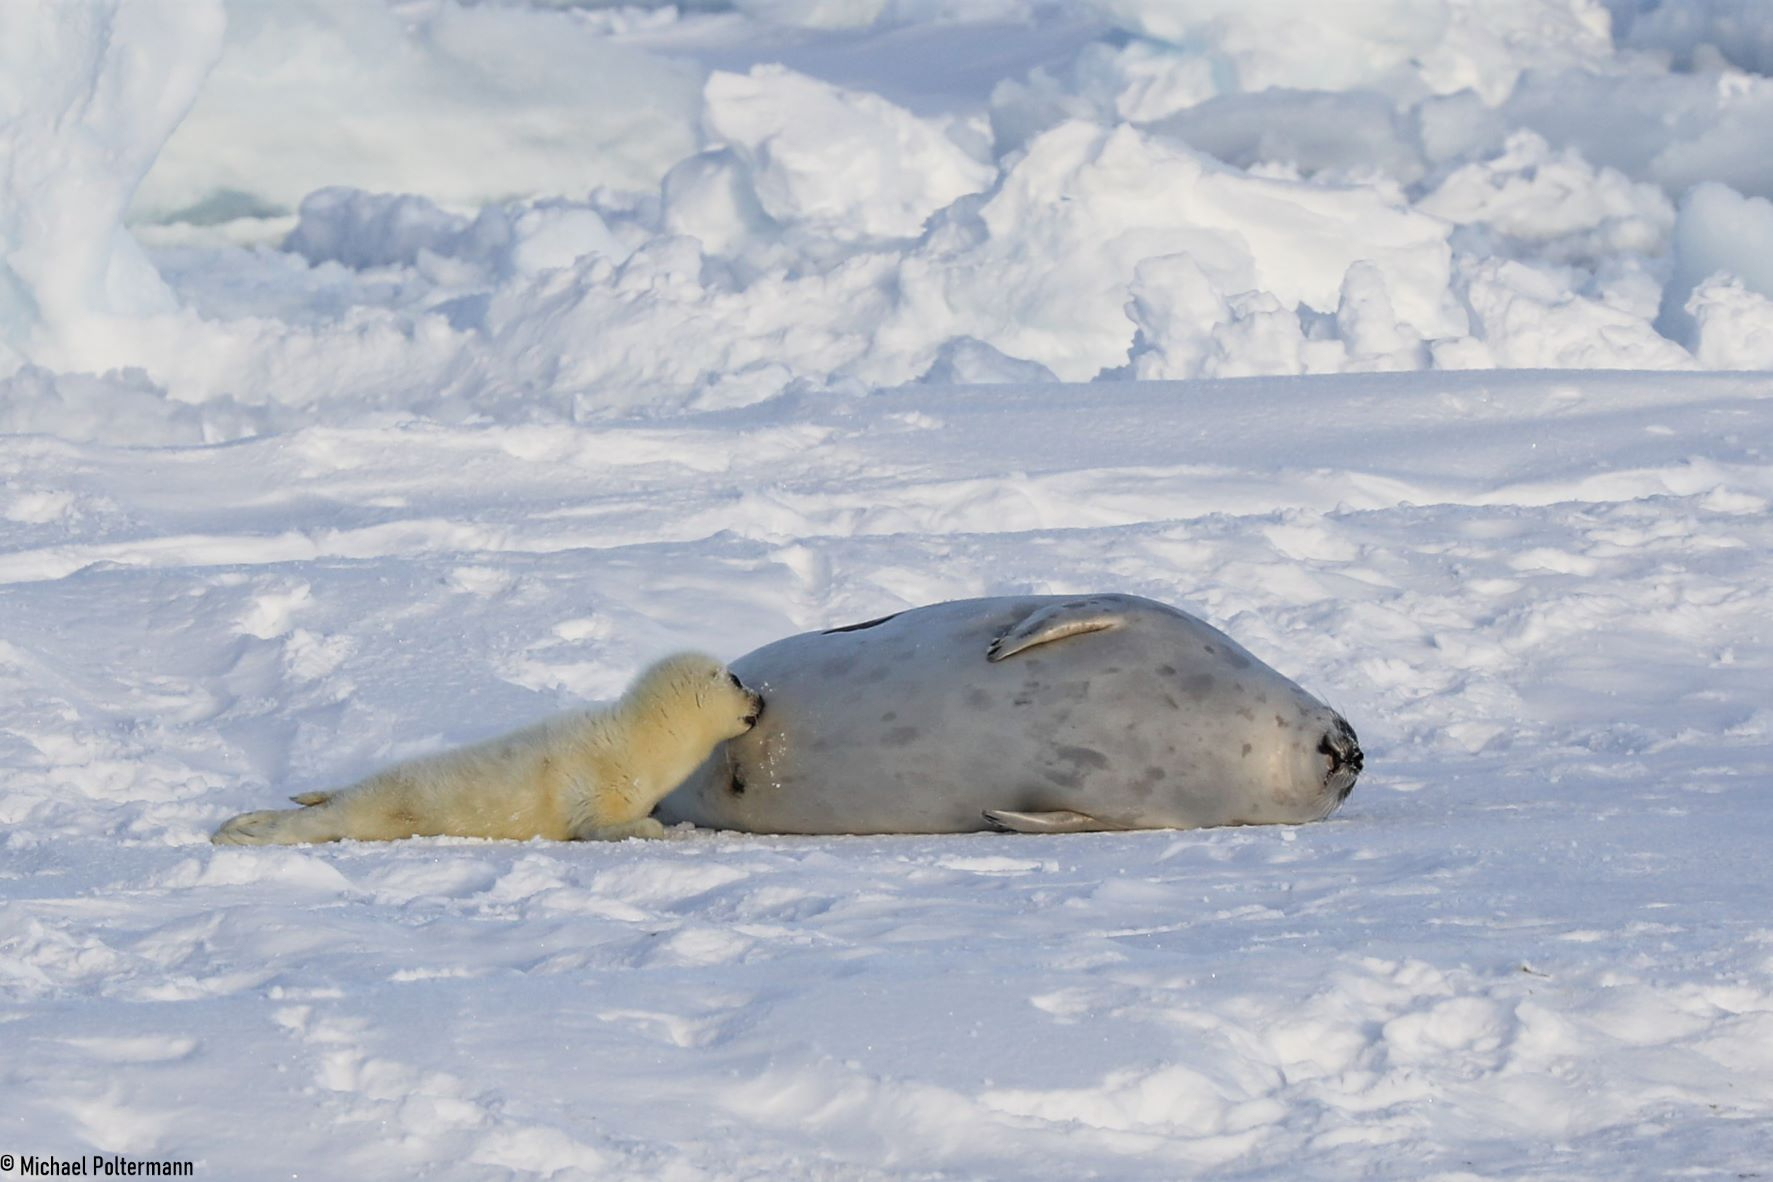 A newborn harp seal is being nursed by its mom. © Michael Poltermann